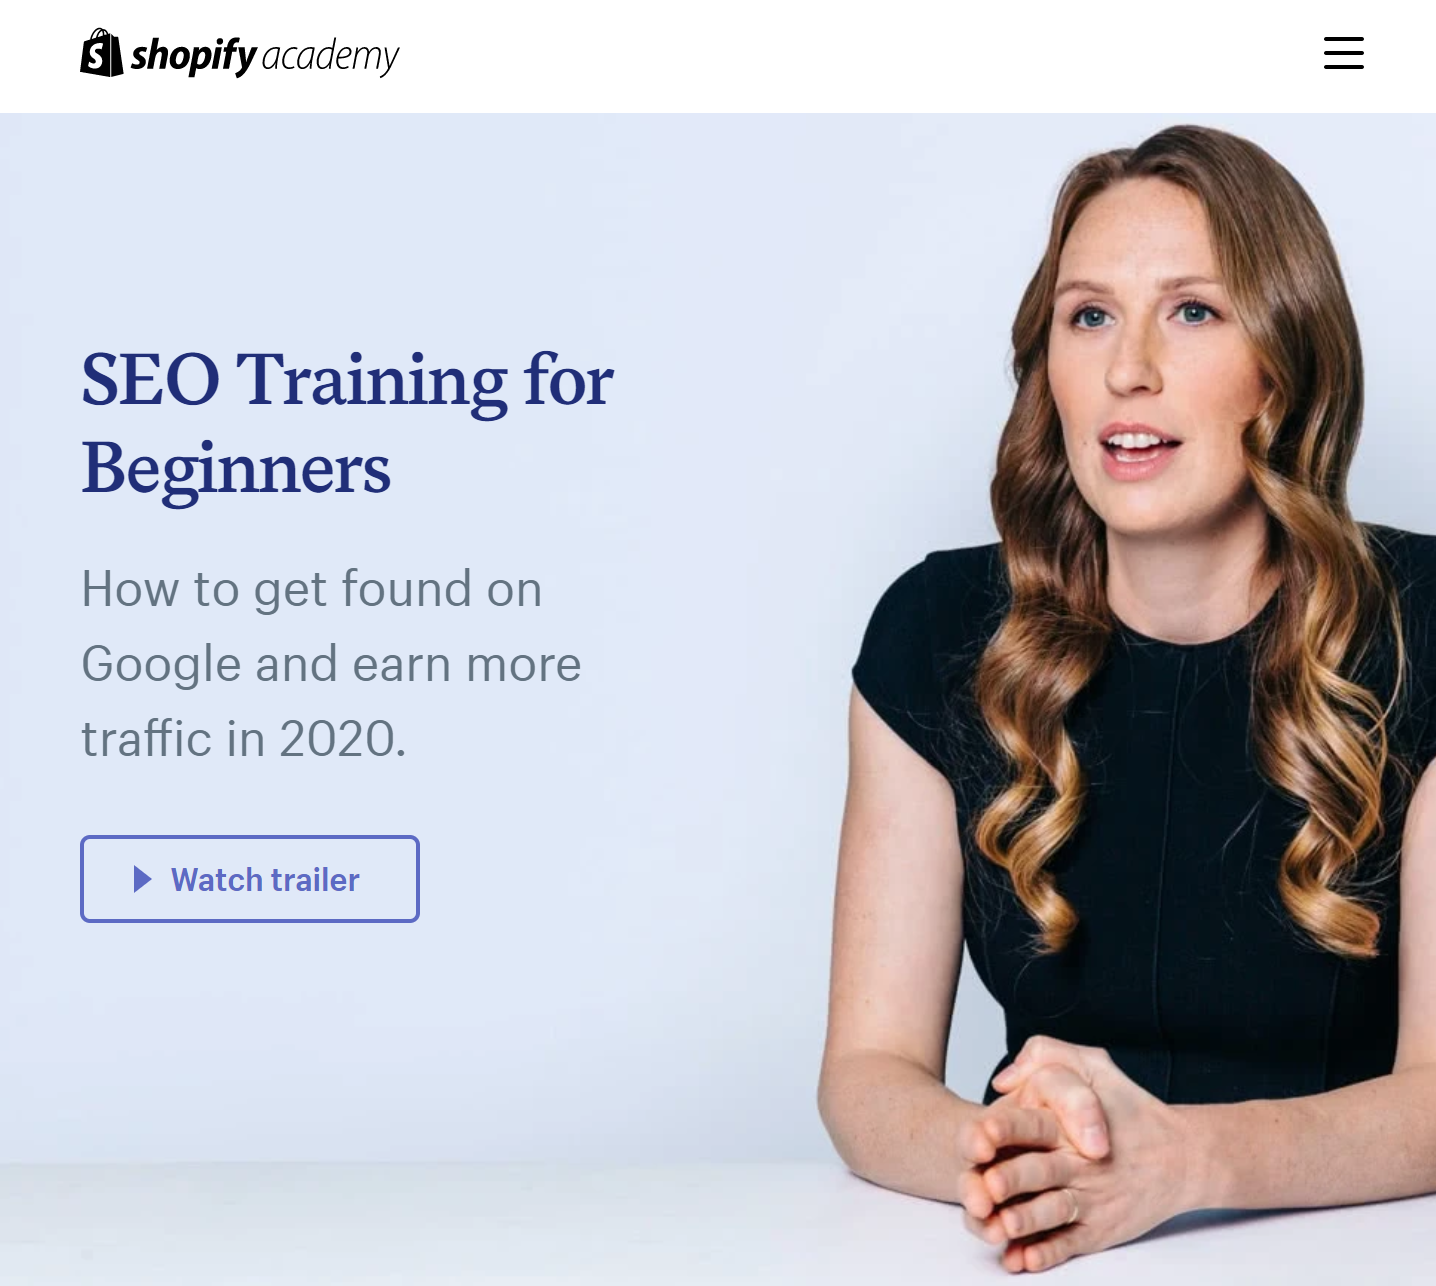 Shopify Academy: SEO Training for Beginners